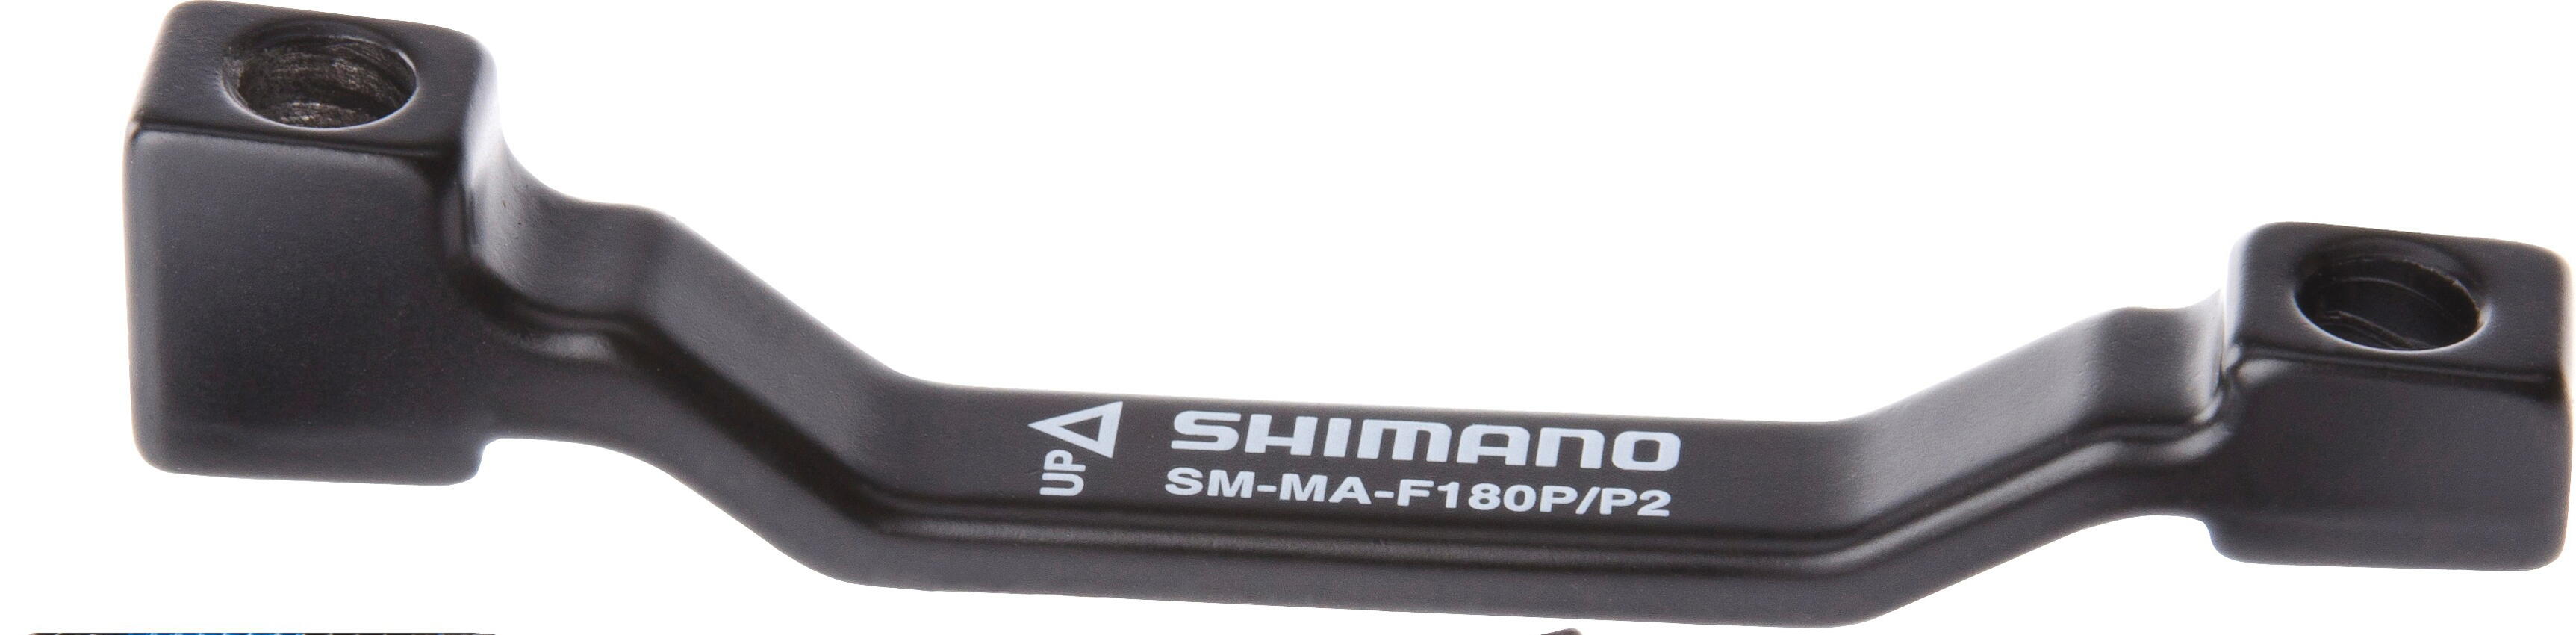 Shimano Disc-Adapter VR 180 PM/PM